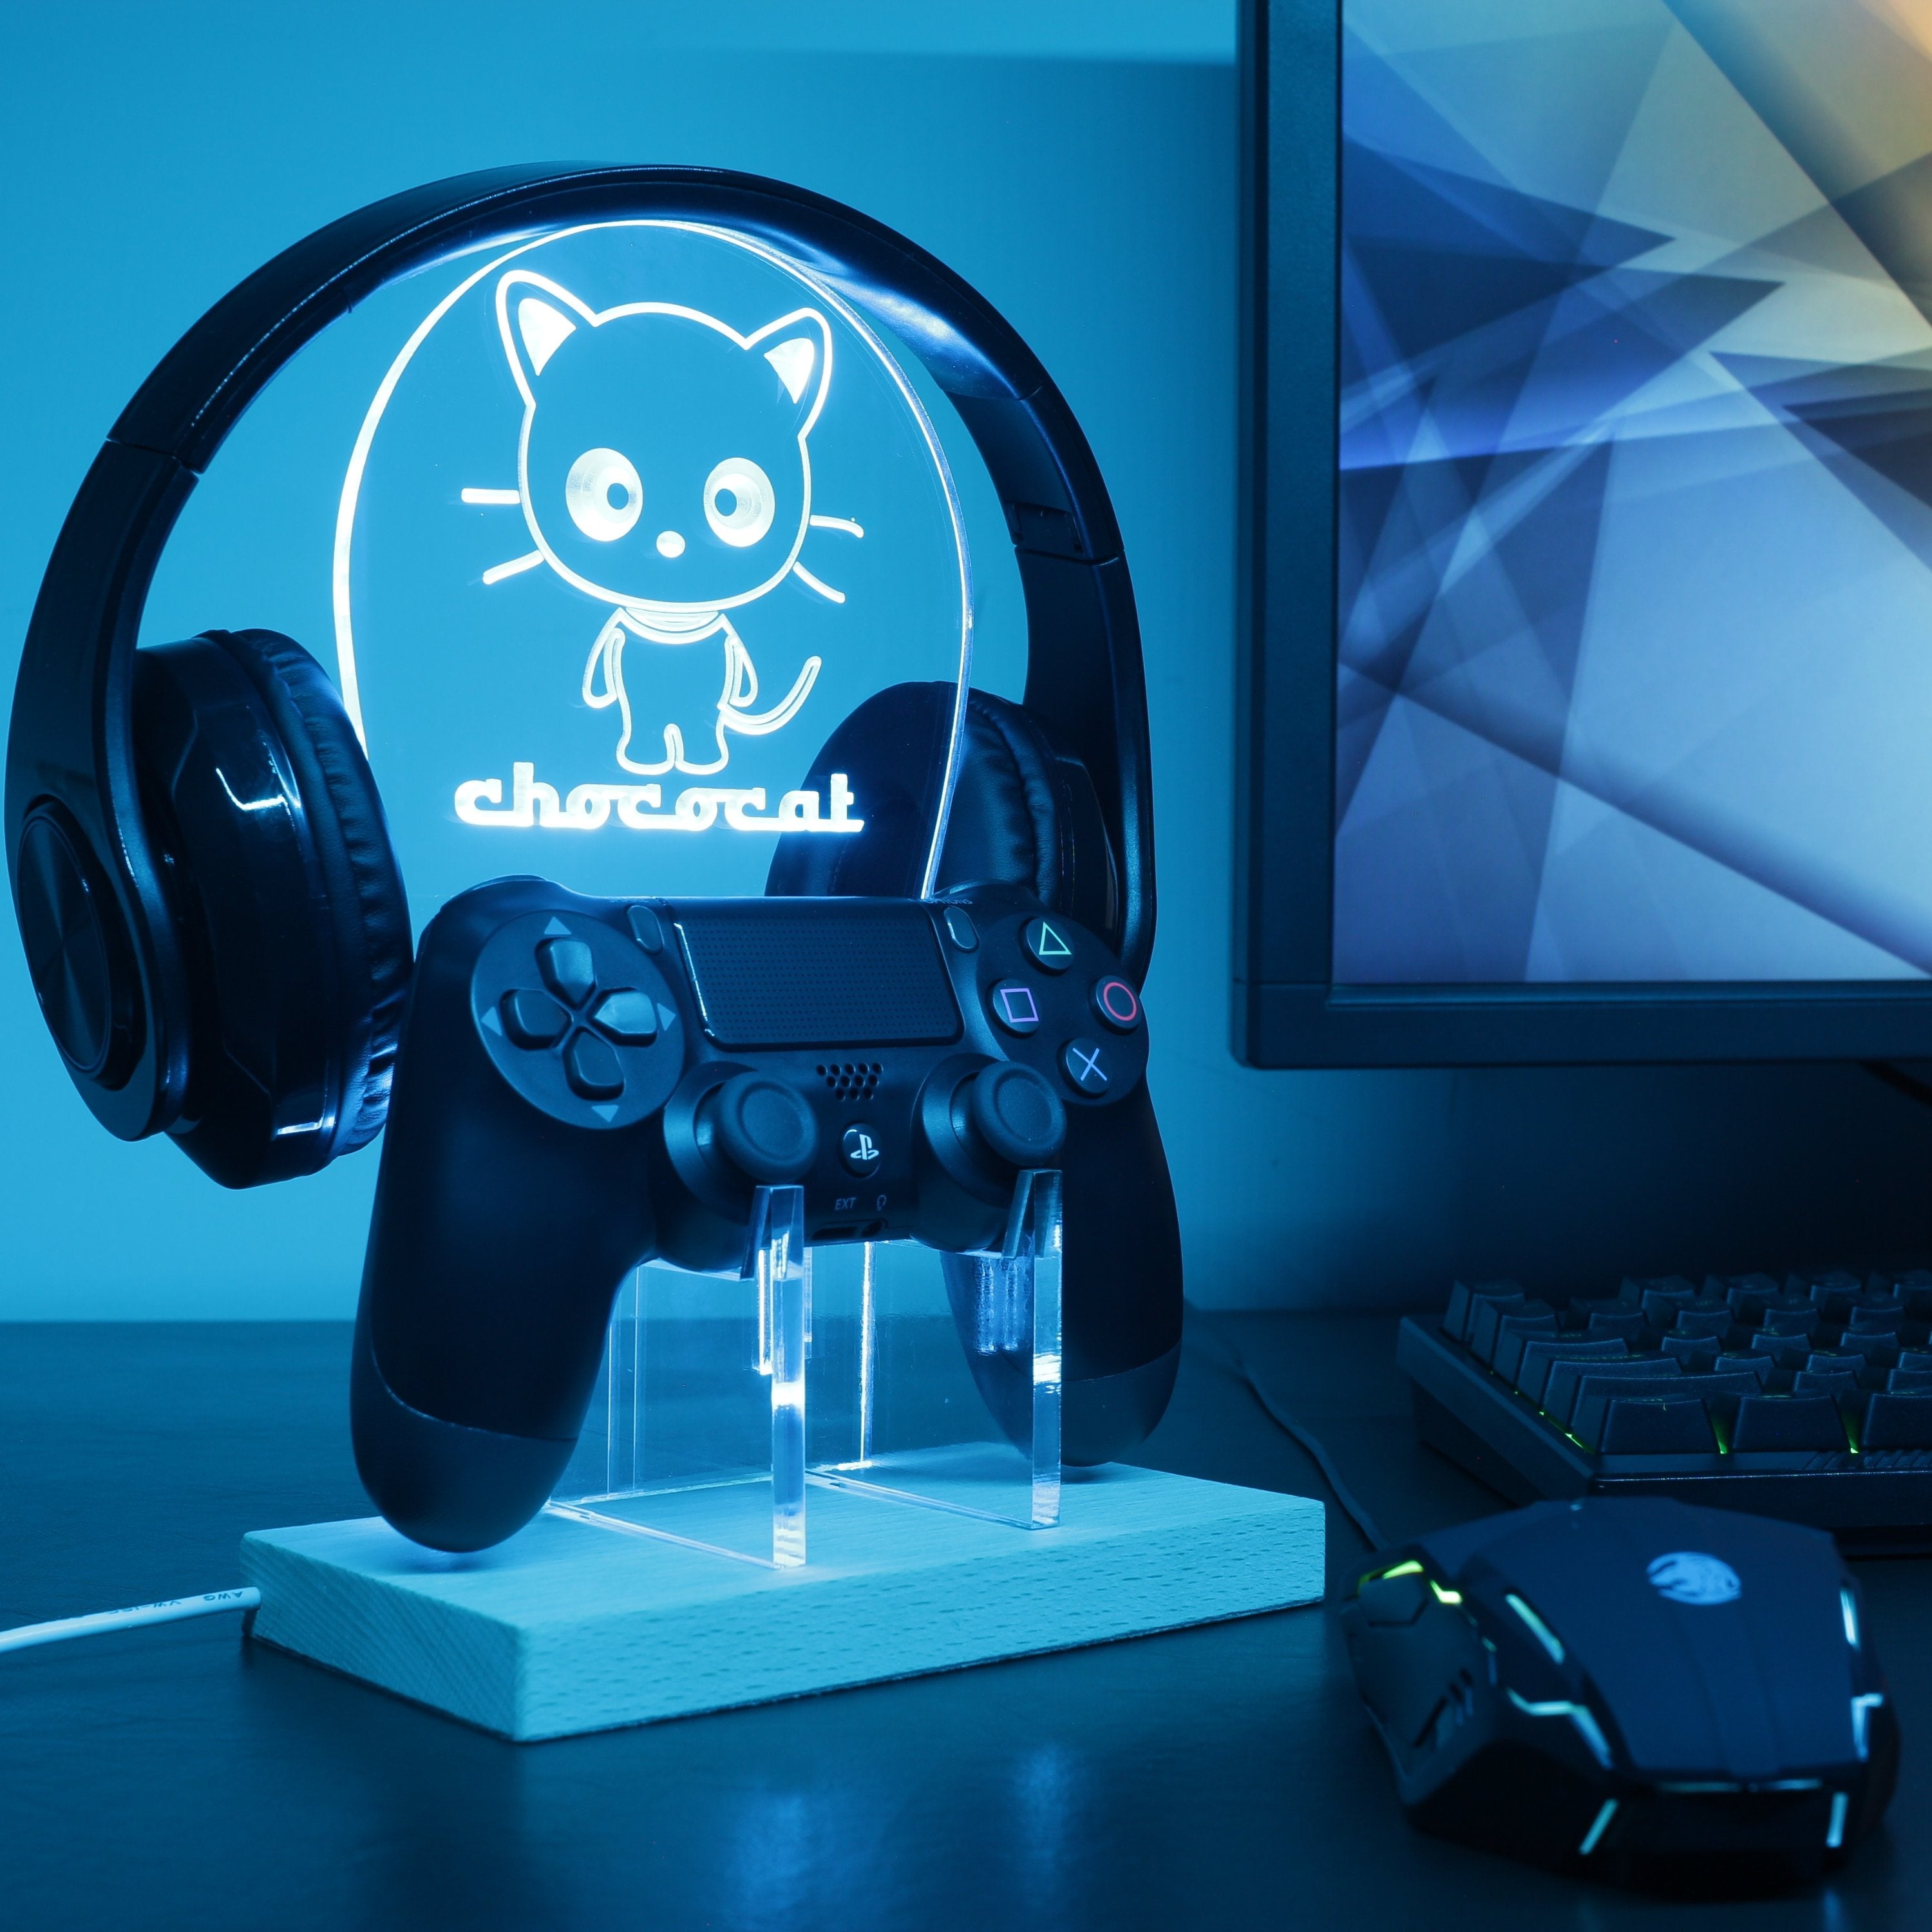 Chococat LED Gaming Headset Controller Stand